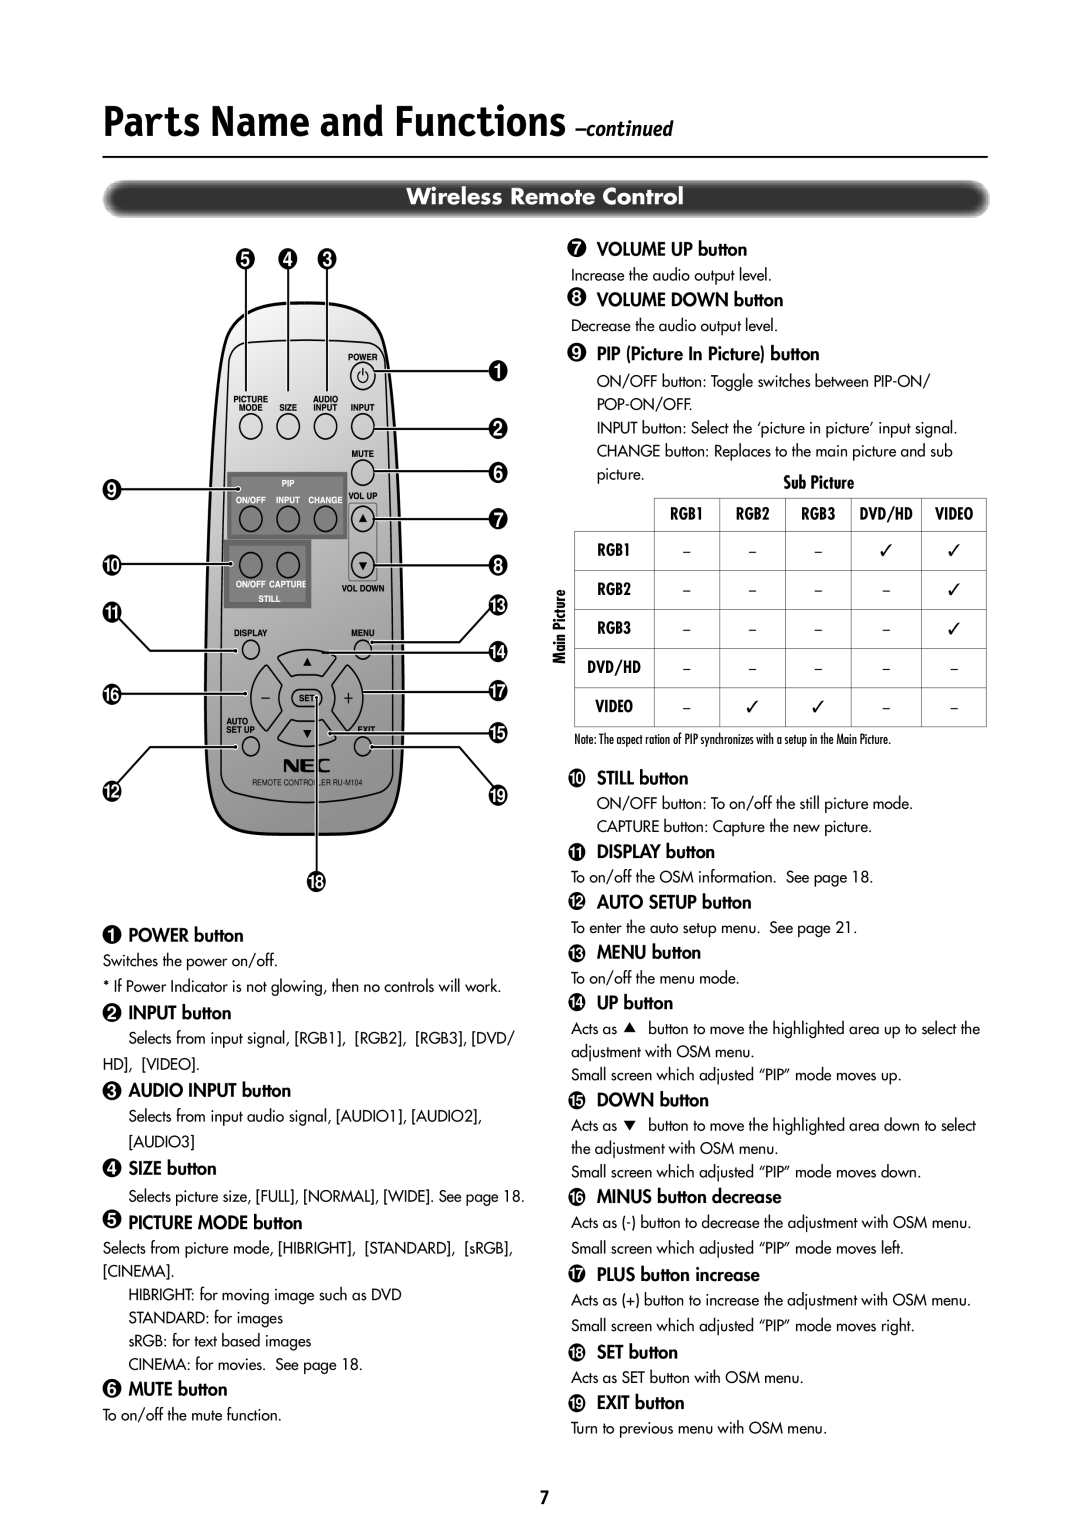 NEC LCD4000 manual Wireless Remote Control, Parts Name and Functions -continued, RGB1, RGB2, RGB3, Dvd/Hd, Video, Picture 